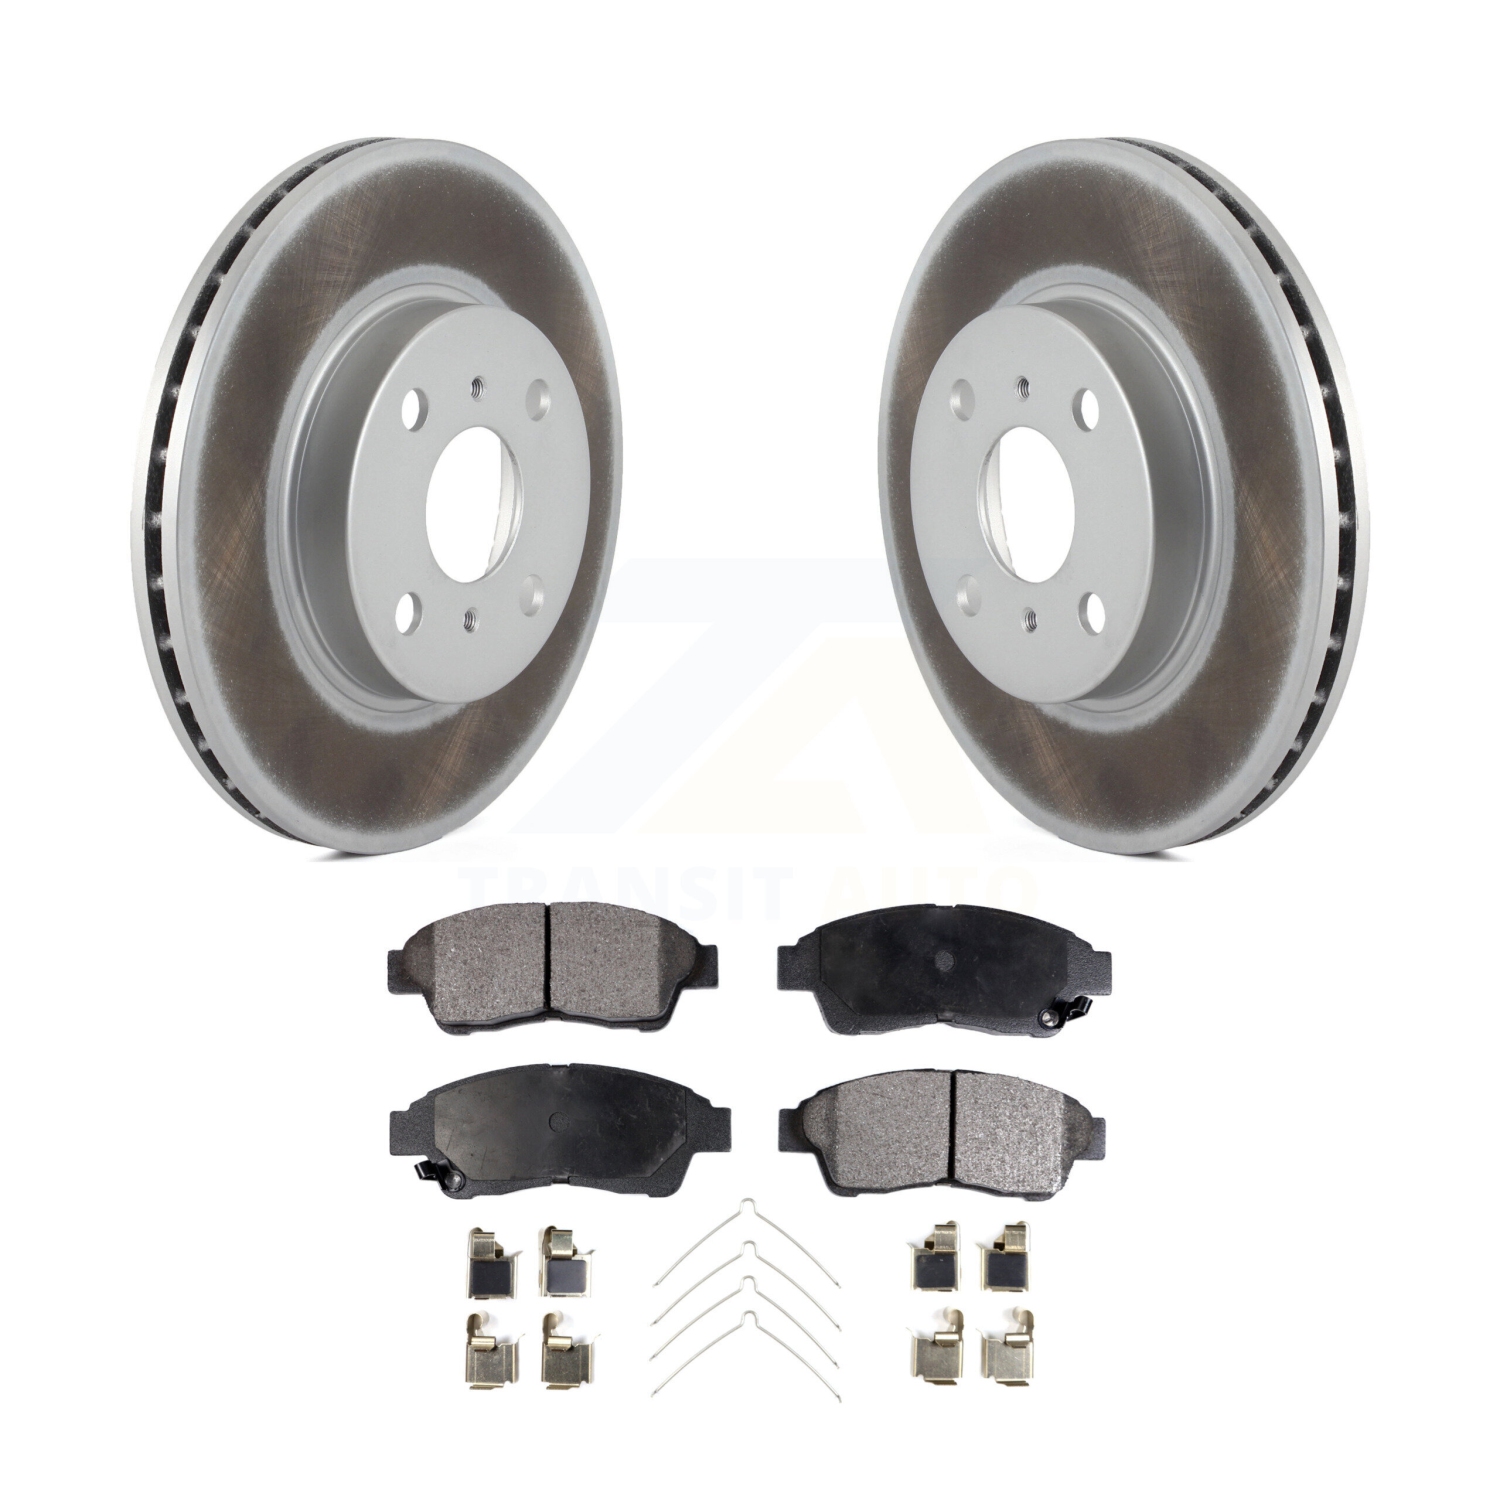 Front Coated Disc Brake Rotors And Ceramic Pad Kit For 1993-1997 Toyota Corolla Geo Prizm KGT-100200